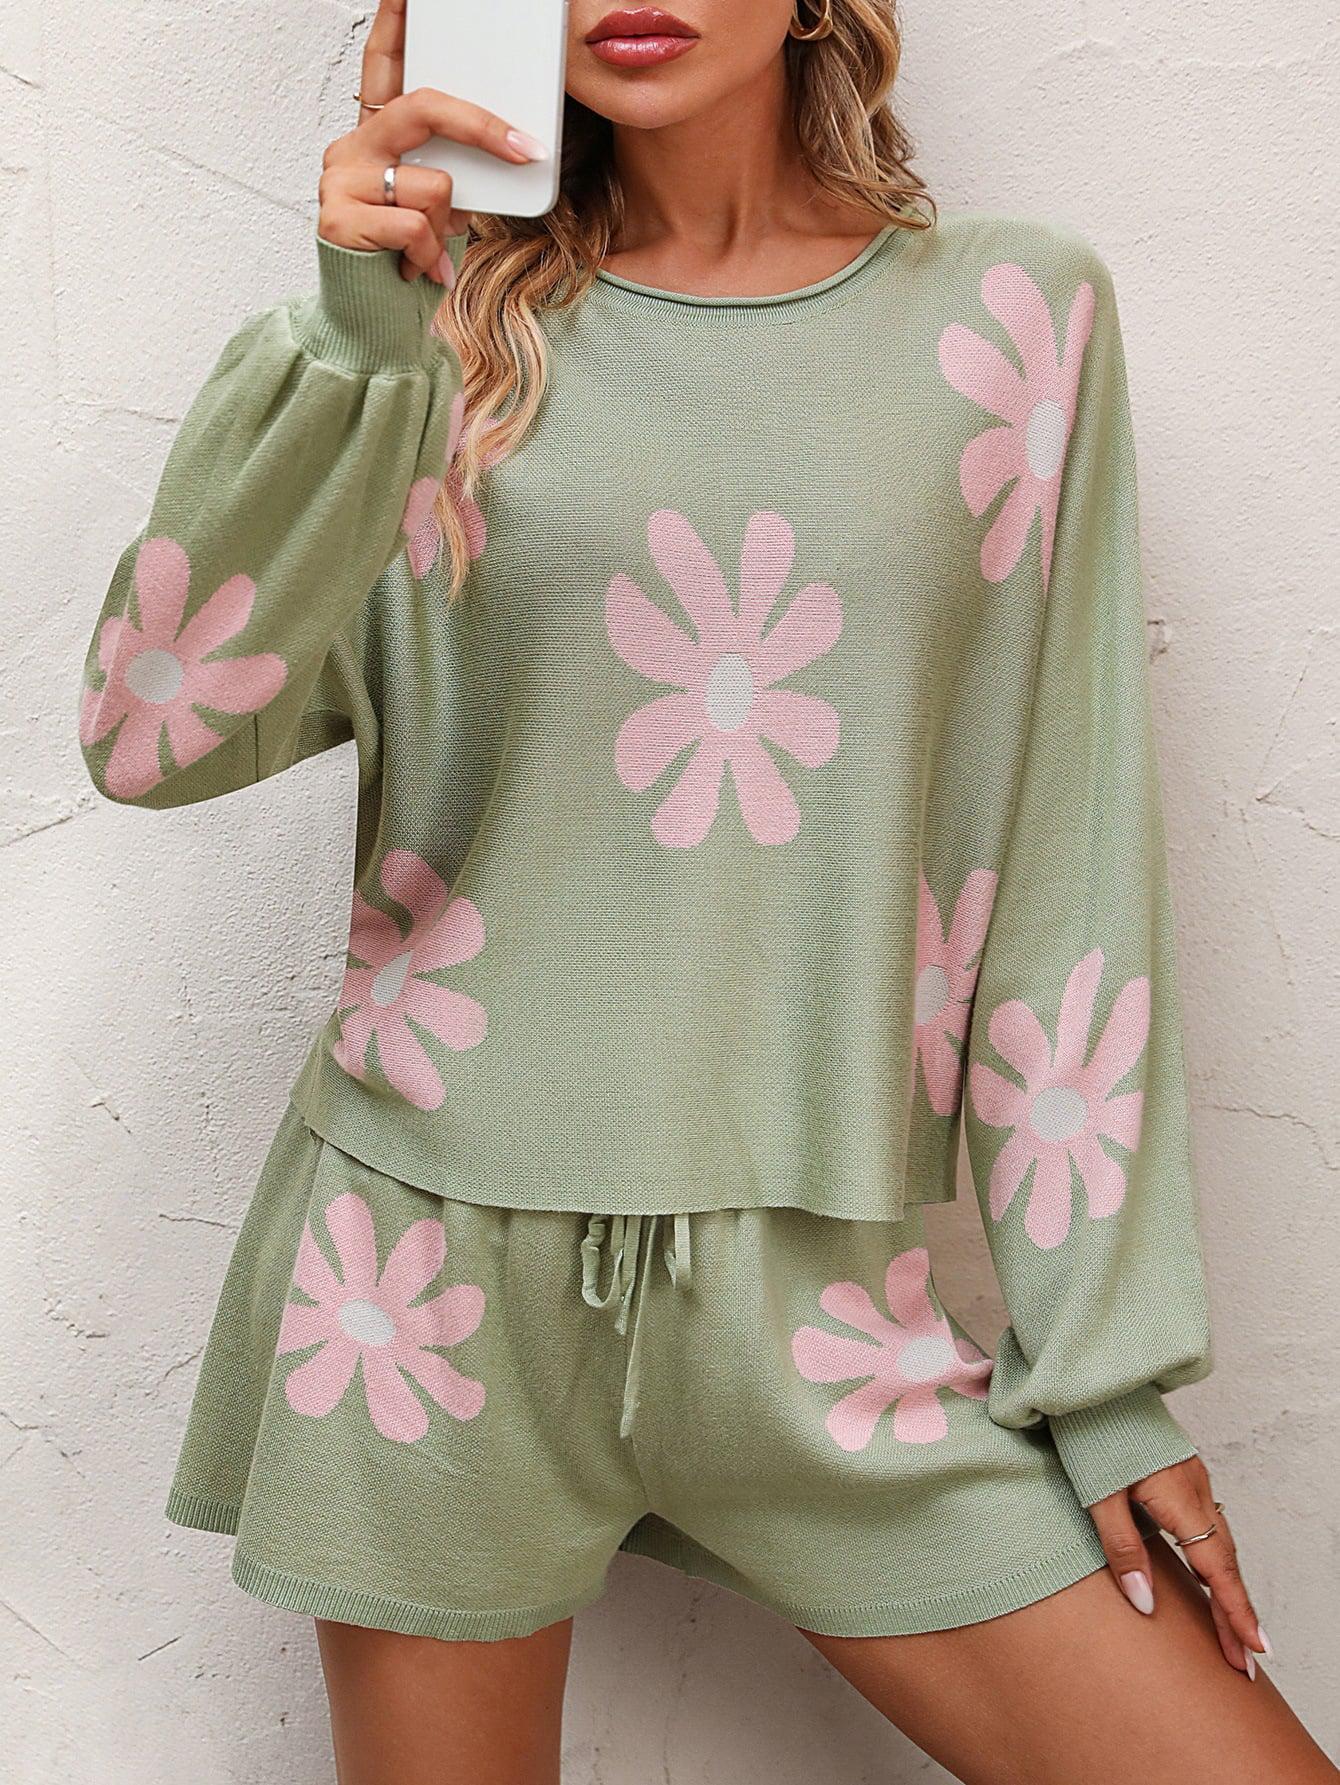 Floral Print Raglan Sleeve Knit Top and Tie Front Sweater Shorts Set BLUE ZONE PLANET